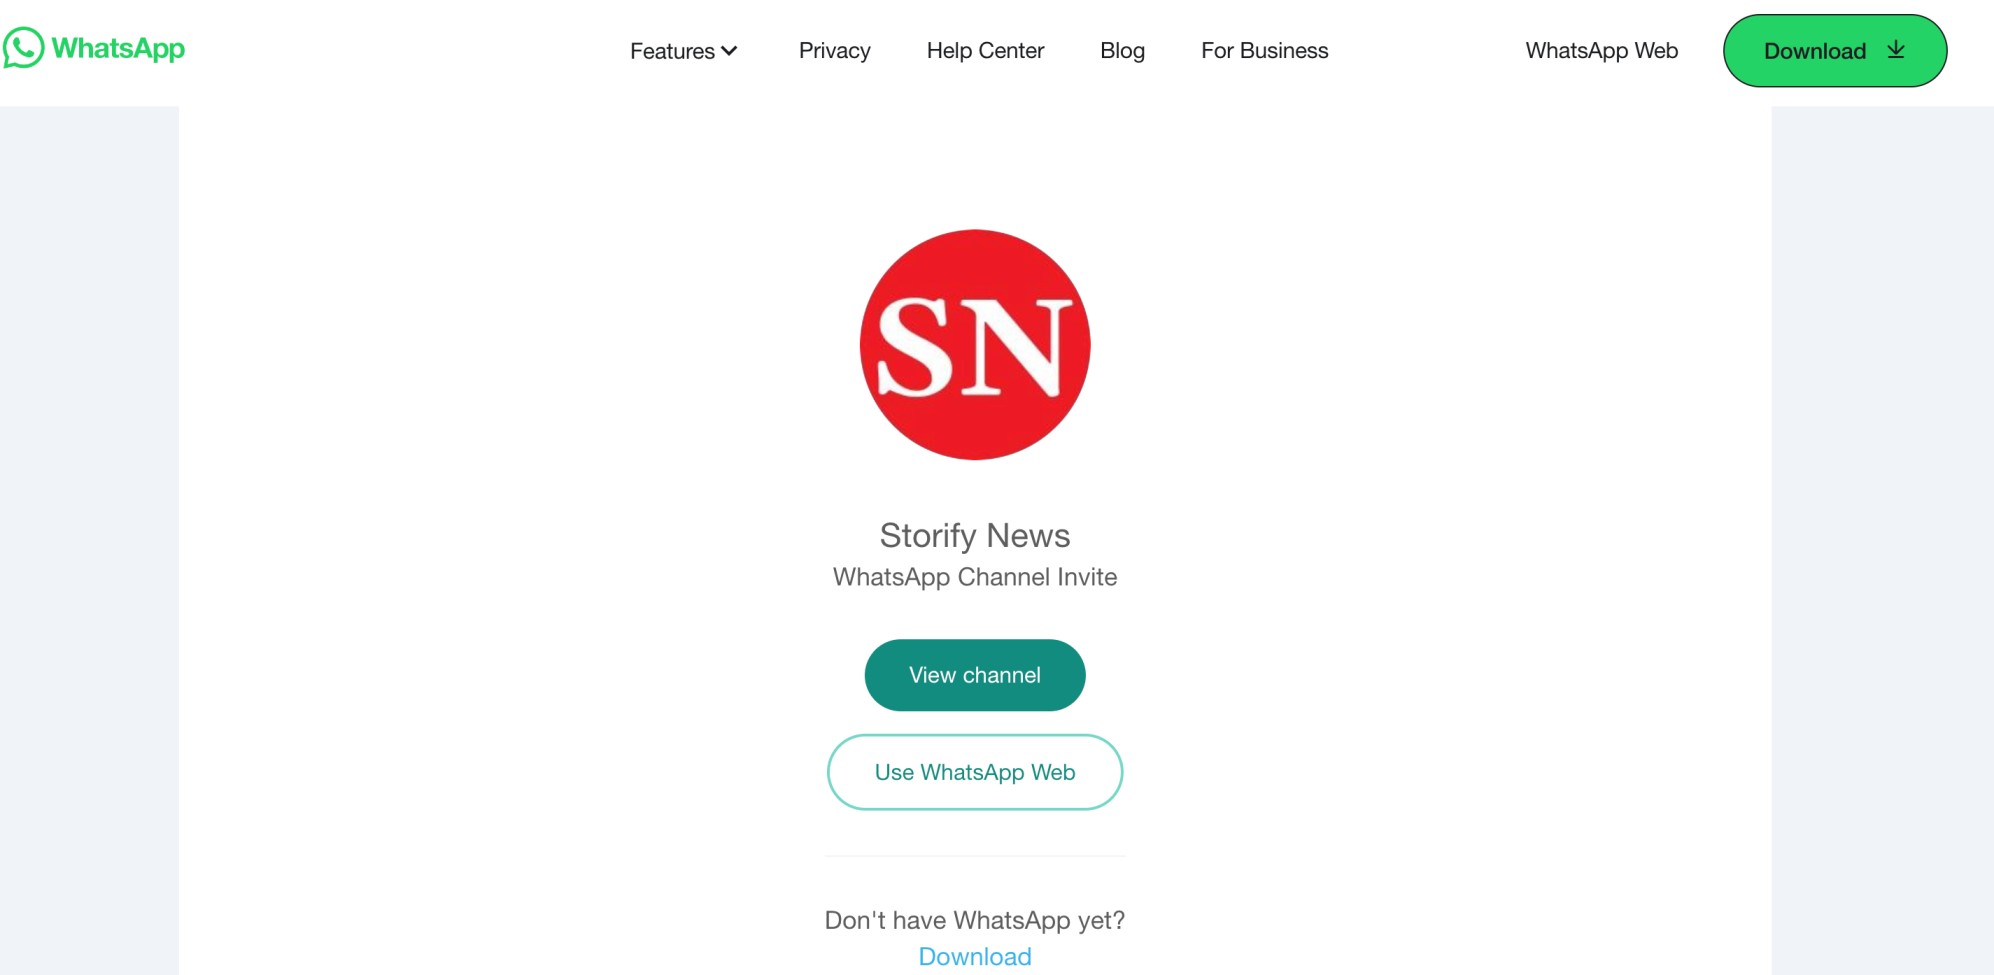 Storify News is Now on WhatsApp Channels: Here's How to Follow Us